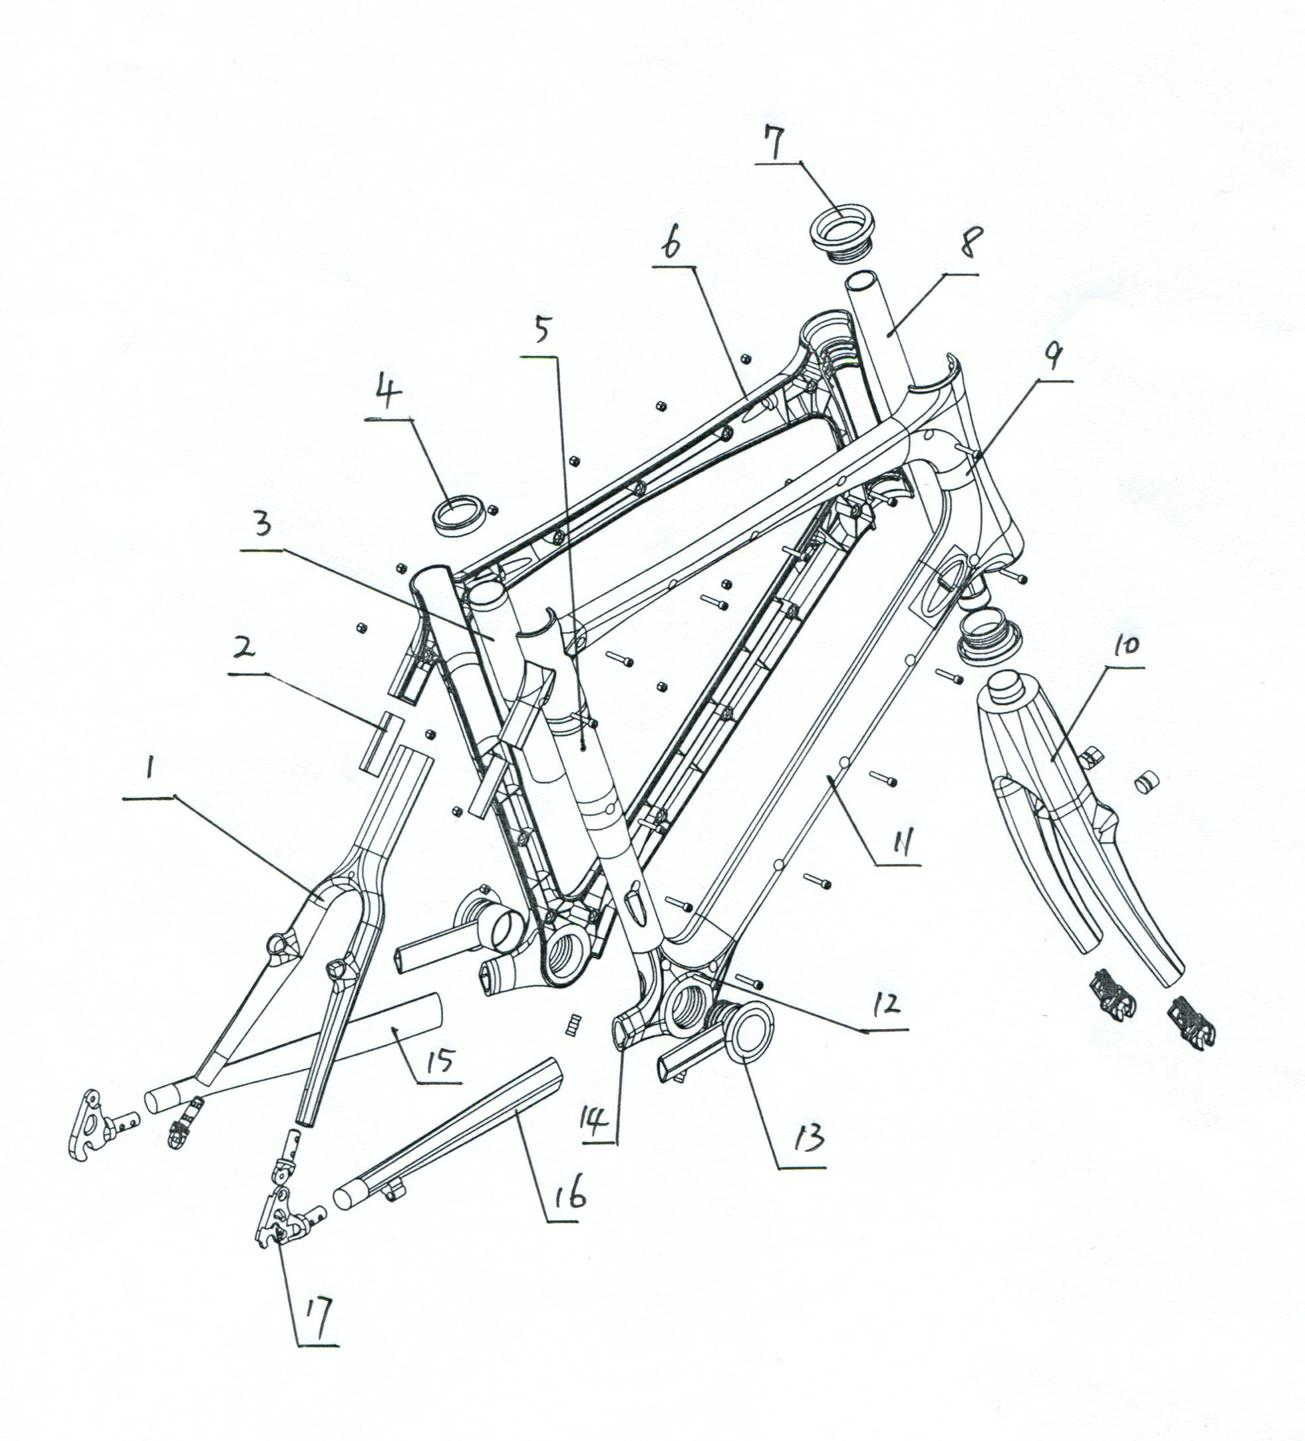 Injection-molded bicycle frame by using carbon-plastic material